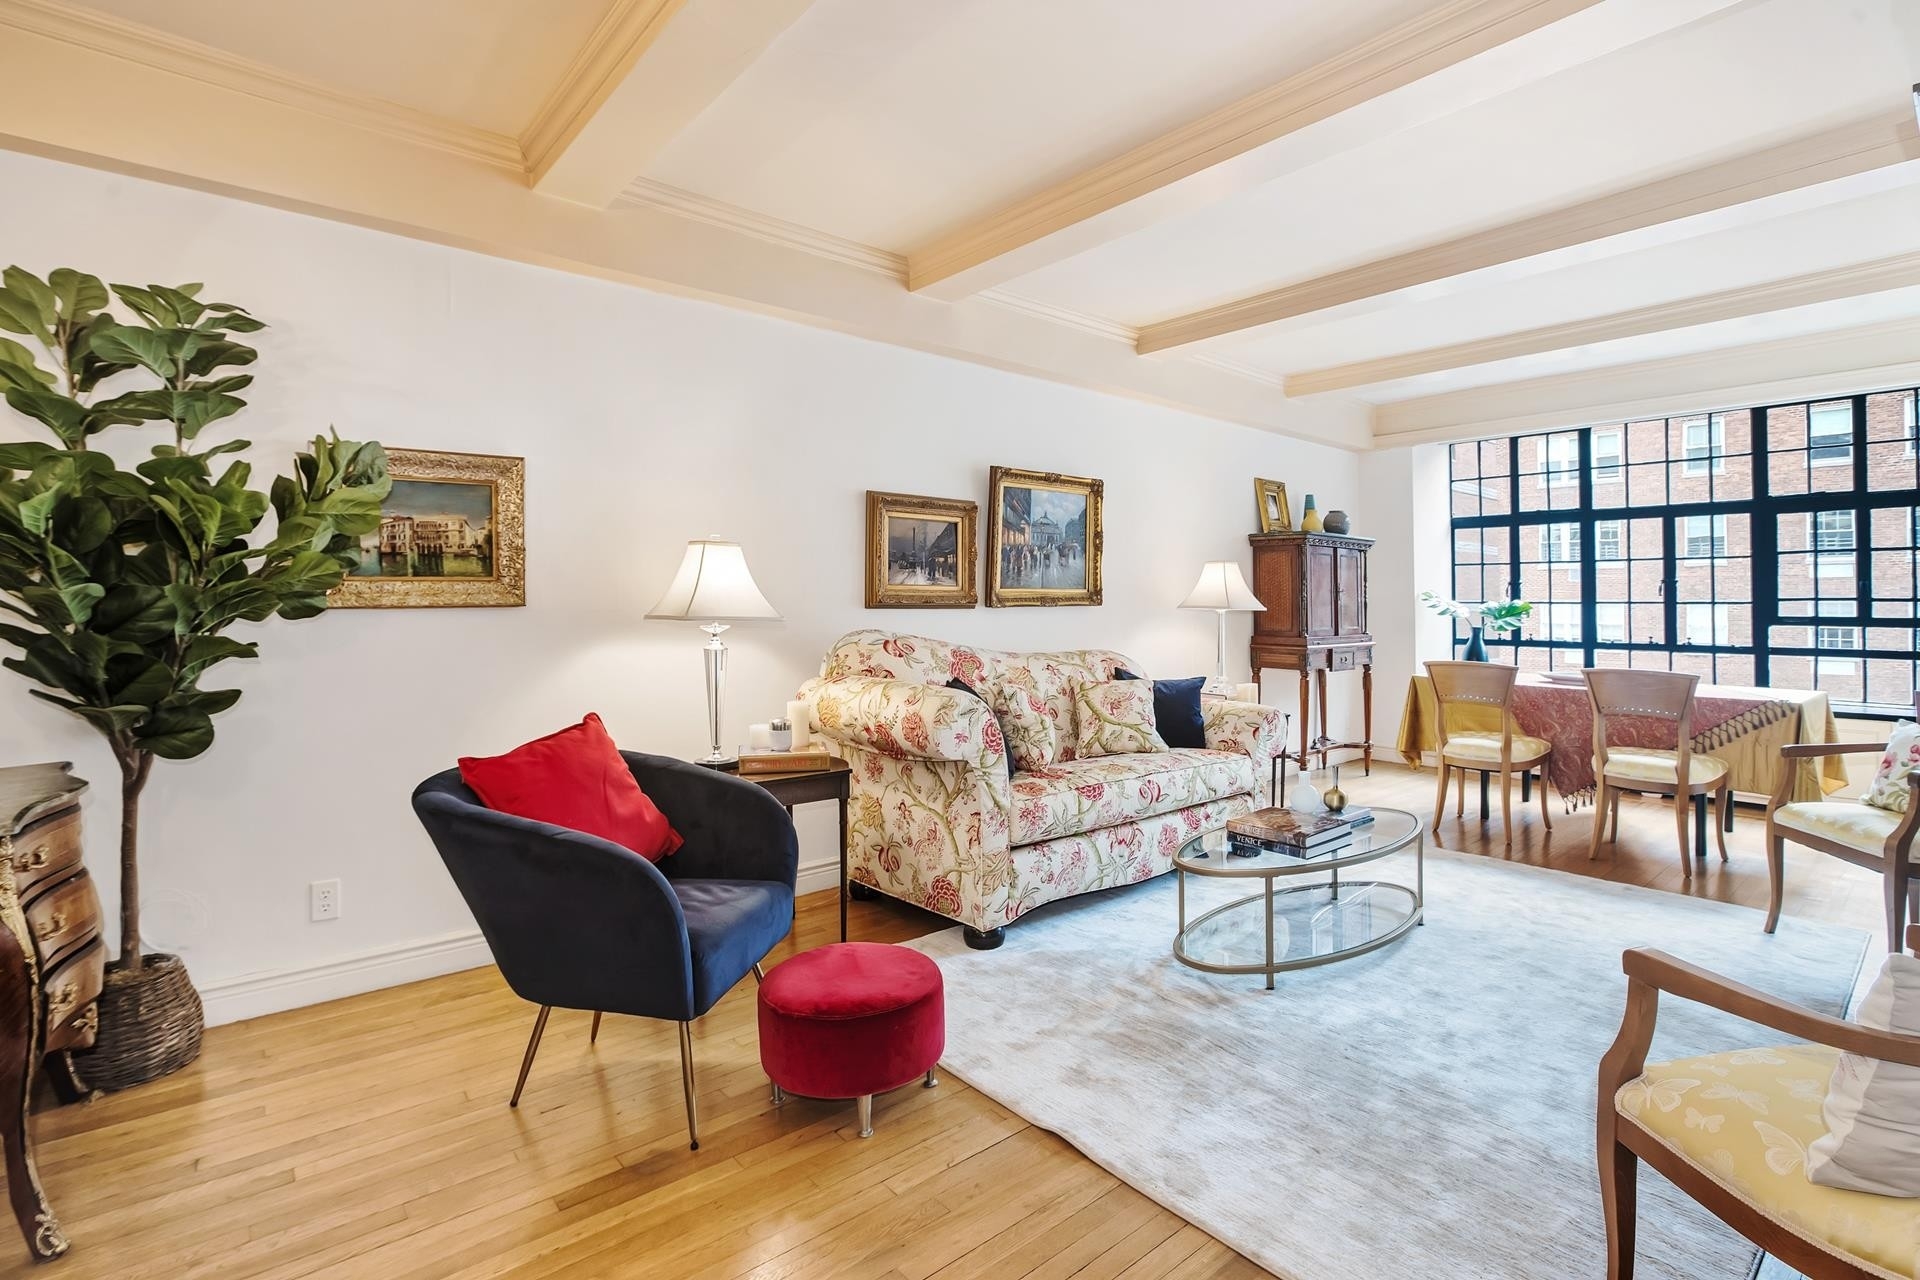 Co-op Properties for Sale at WALTON HALL, 325 E 72ND ST, 14B Lenox Hill, New York, NY 10021